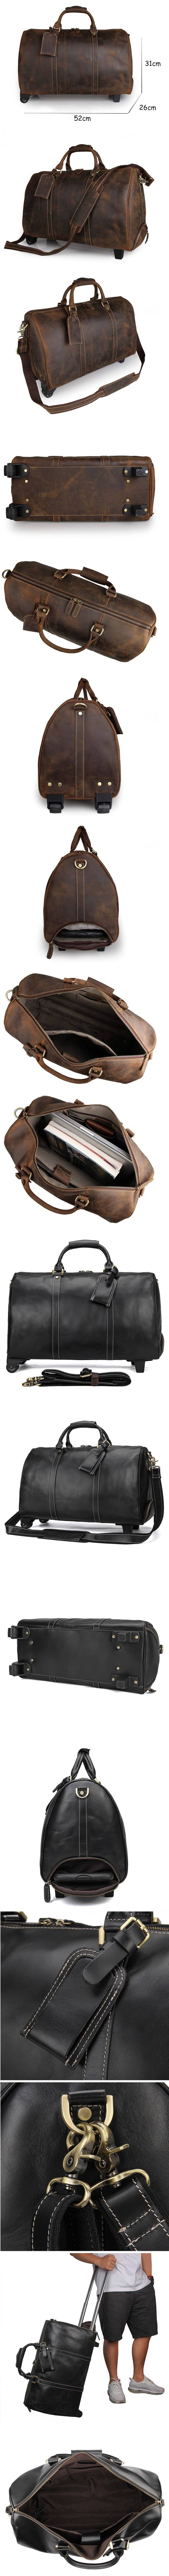 Model Show and Product Details of Woosir Leather Rolling Duffle Bag 20 Inch